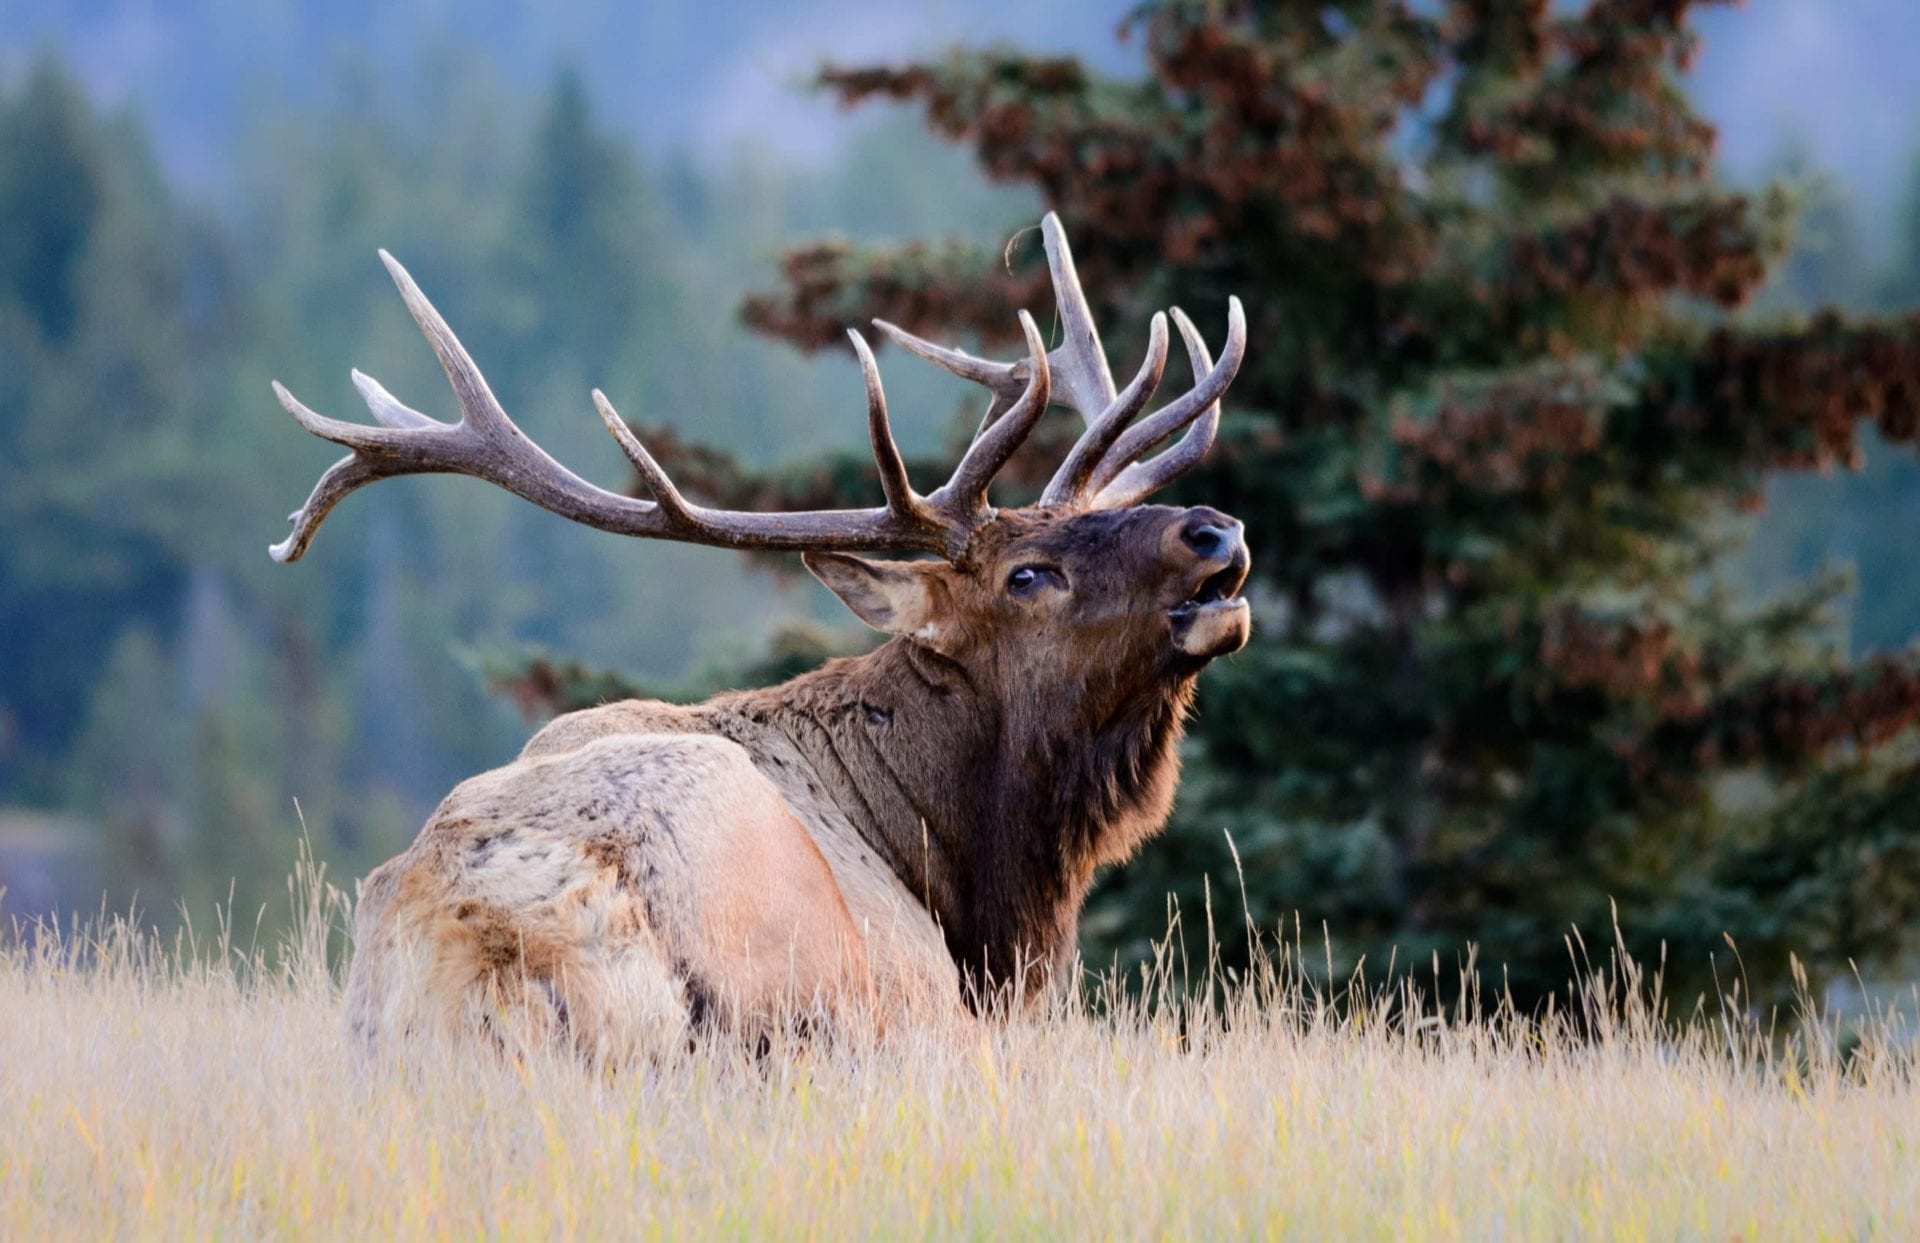 Your elk hunting success will depend on making the right choices before your elk hunt. We can help you find elk hunting success.